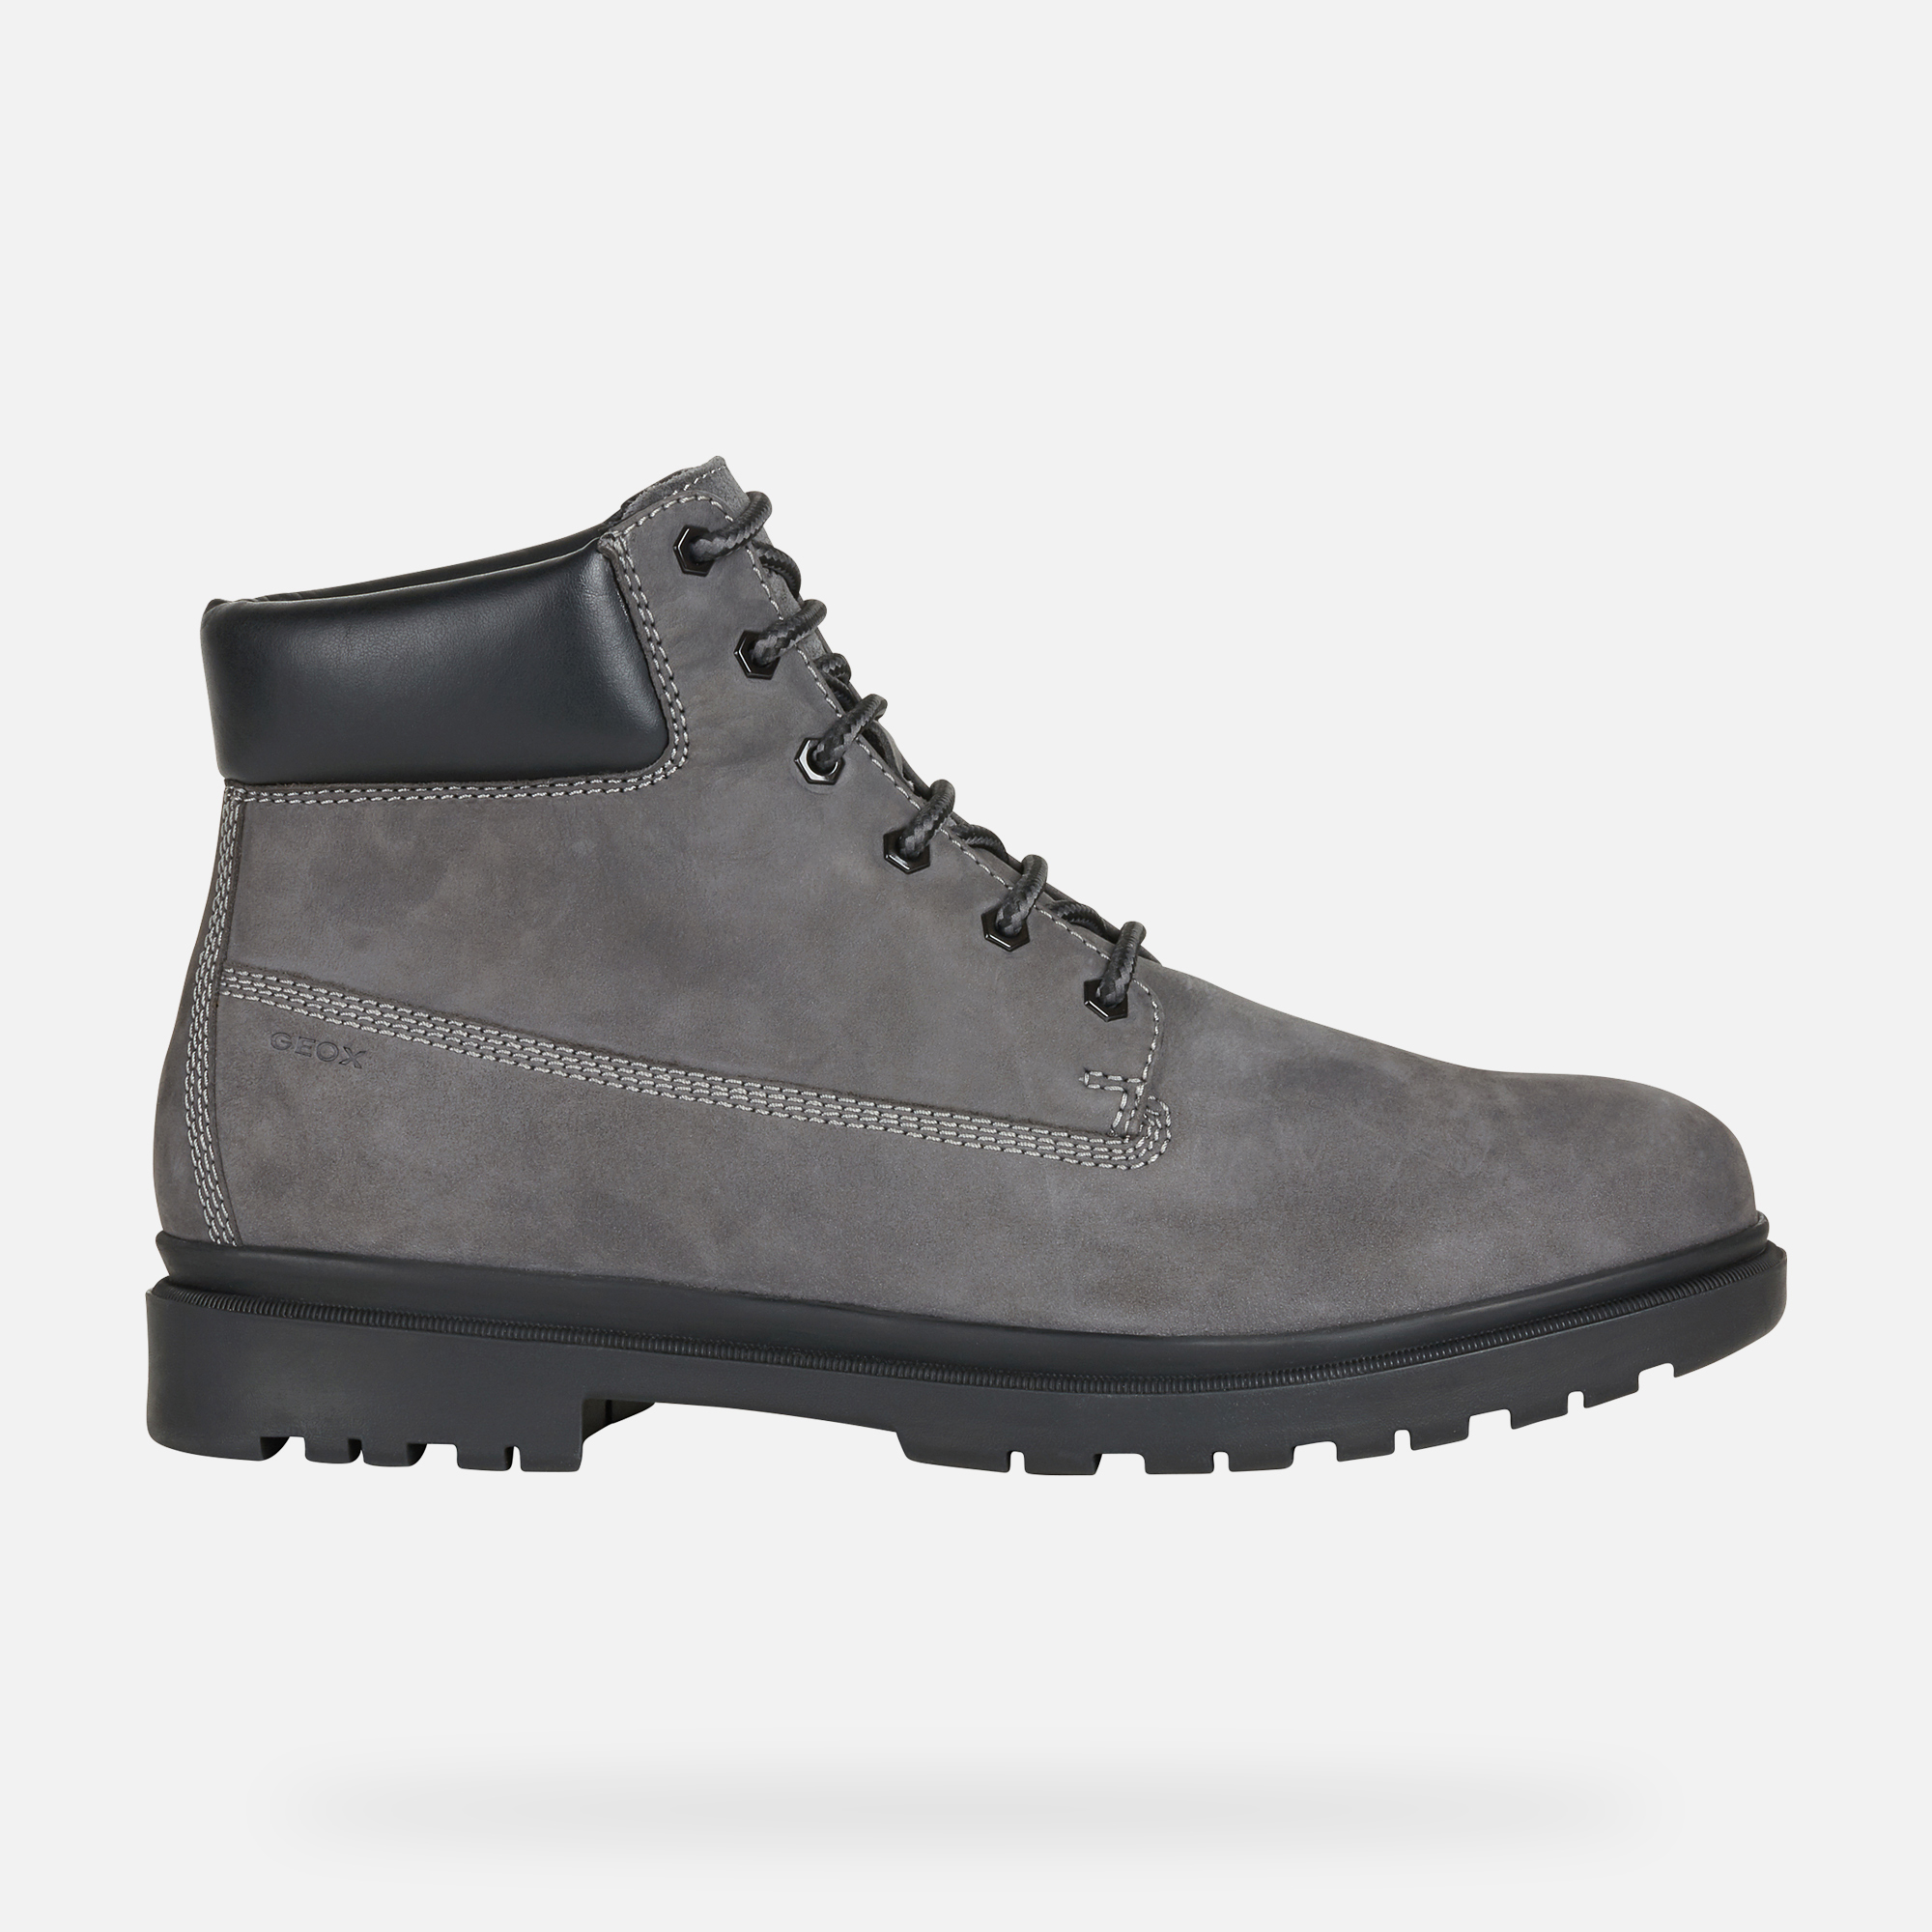 Geox® ANDALO Man: Dark grey Ankle Boots | Geox® FW21